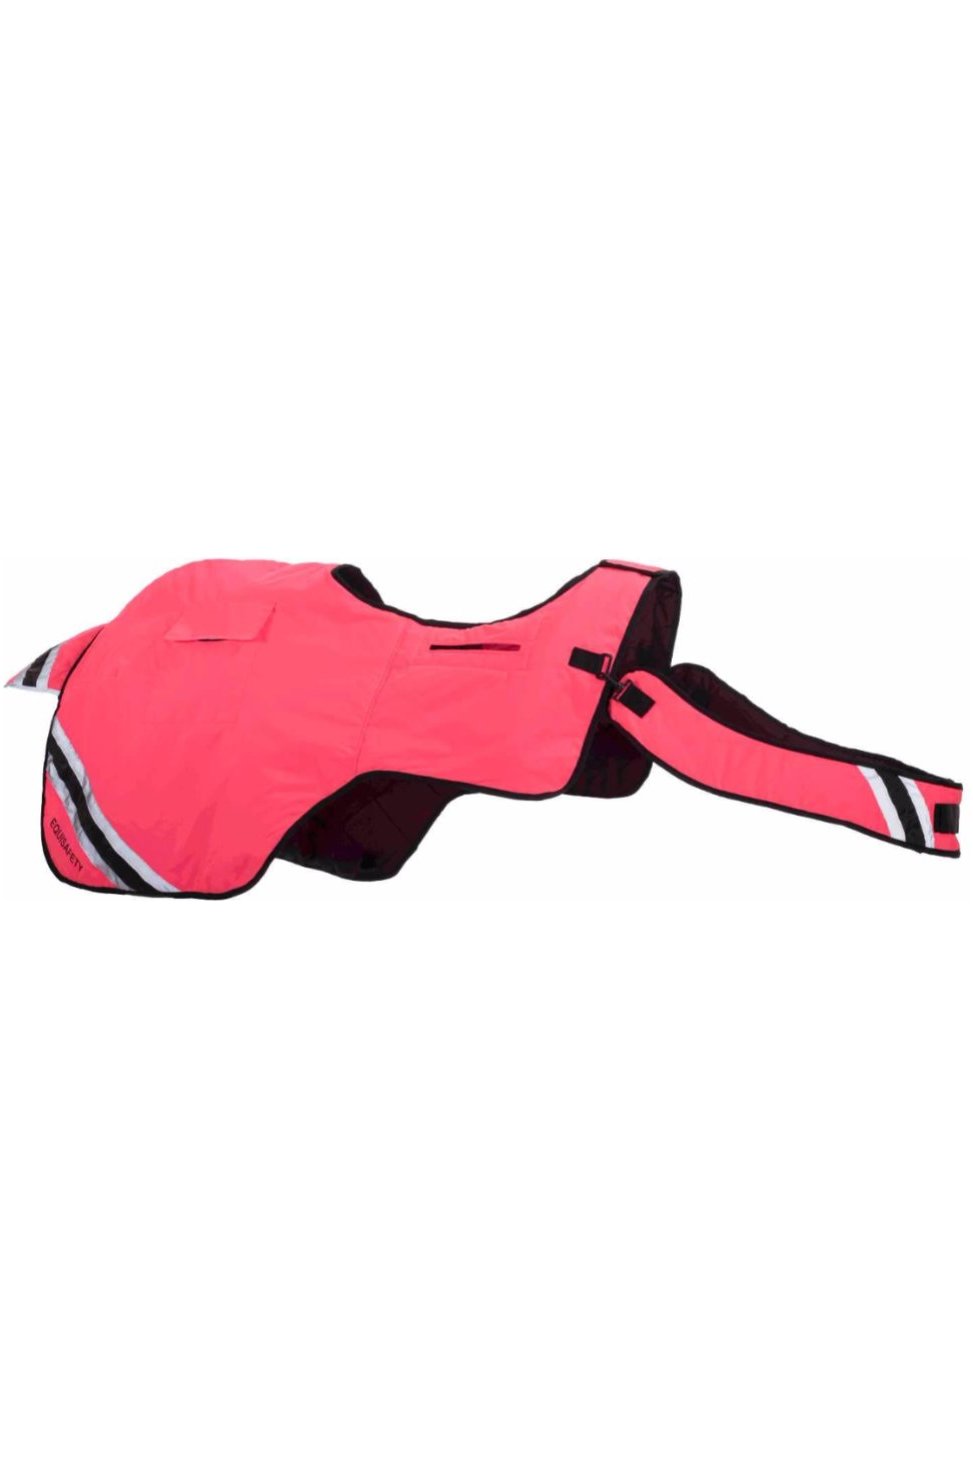 Around Hi-Vis Waterproof WRUG Drillshed Horse The - Rug - Equisafety Wrap Exercise - 2023 Pink |